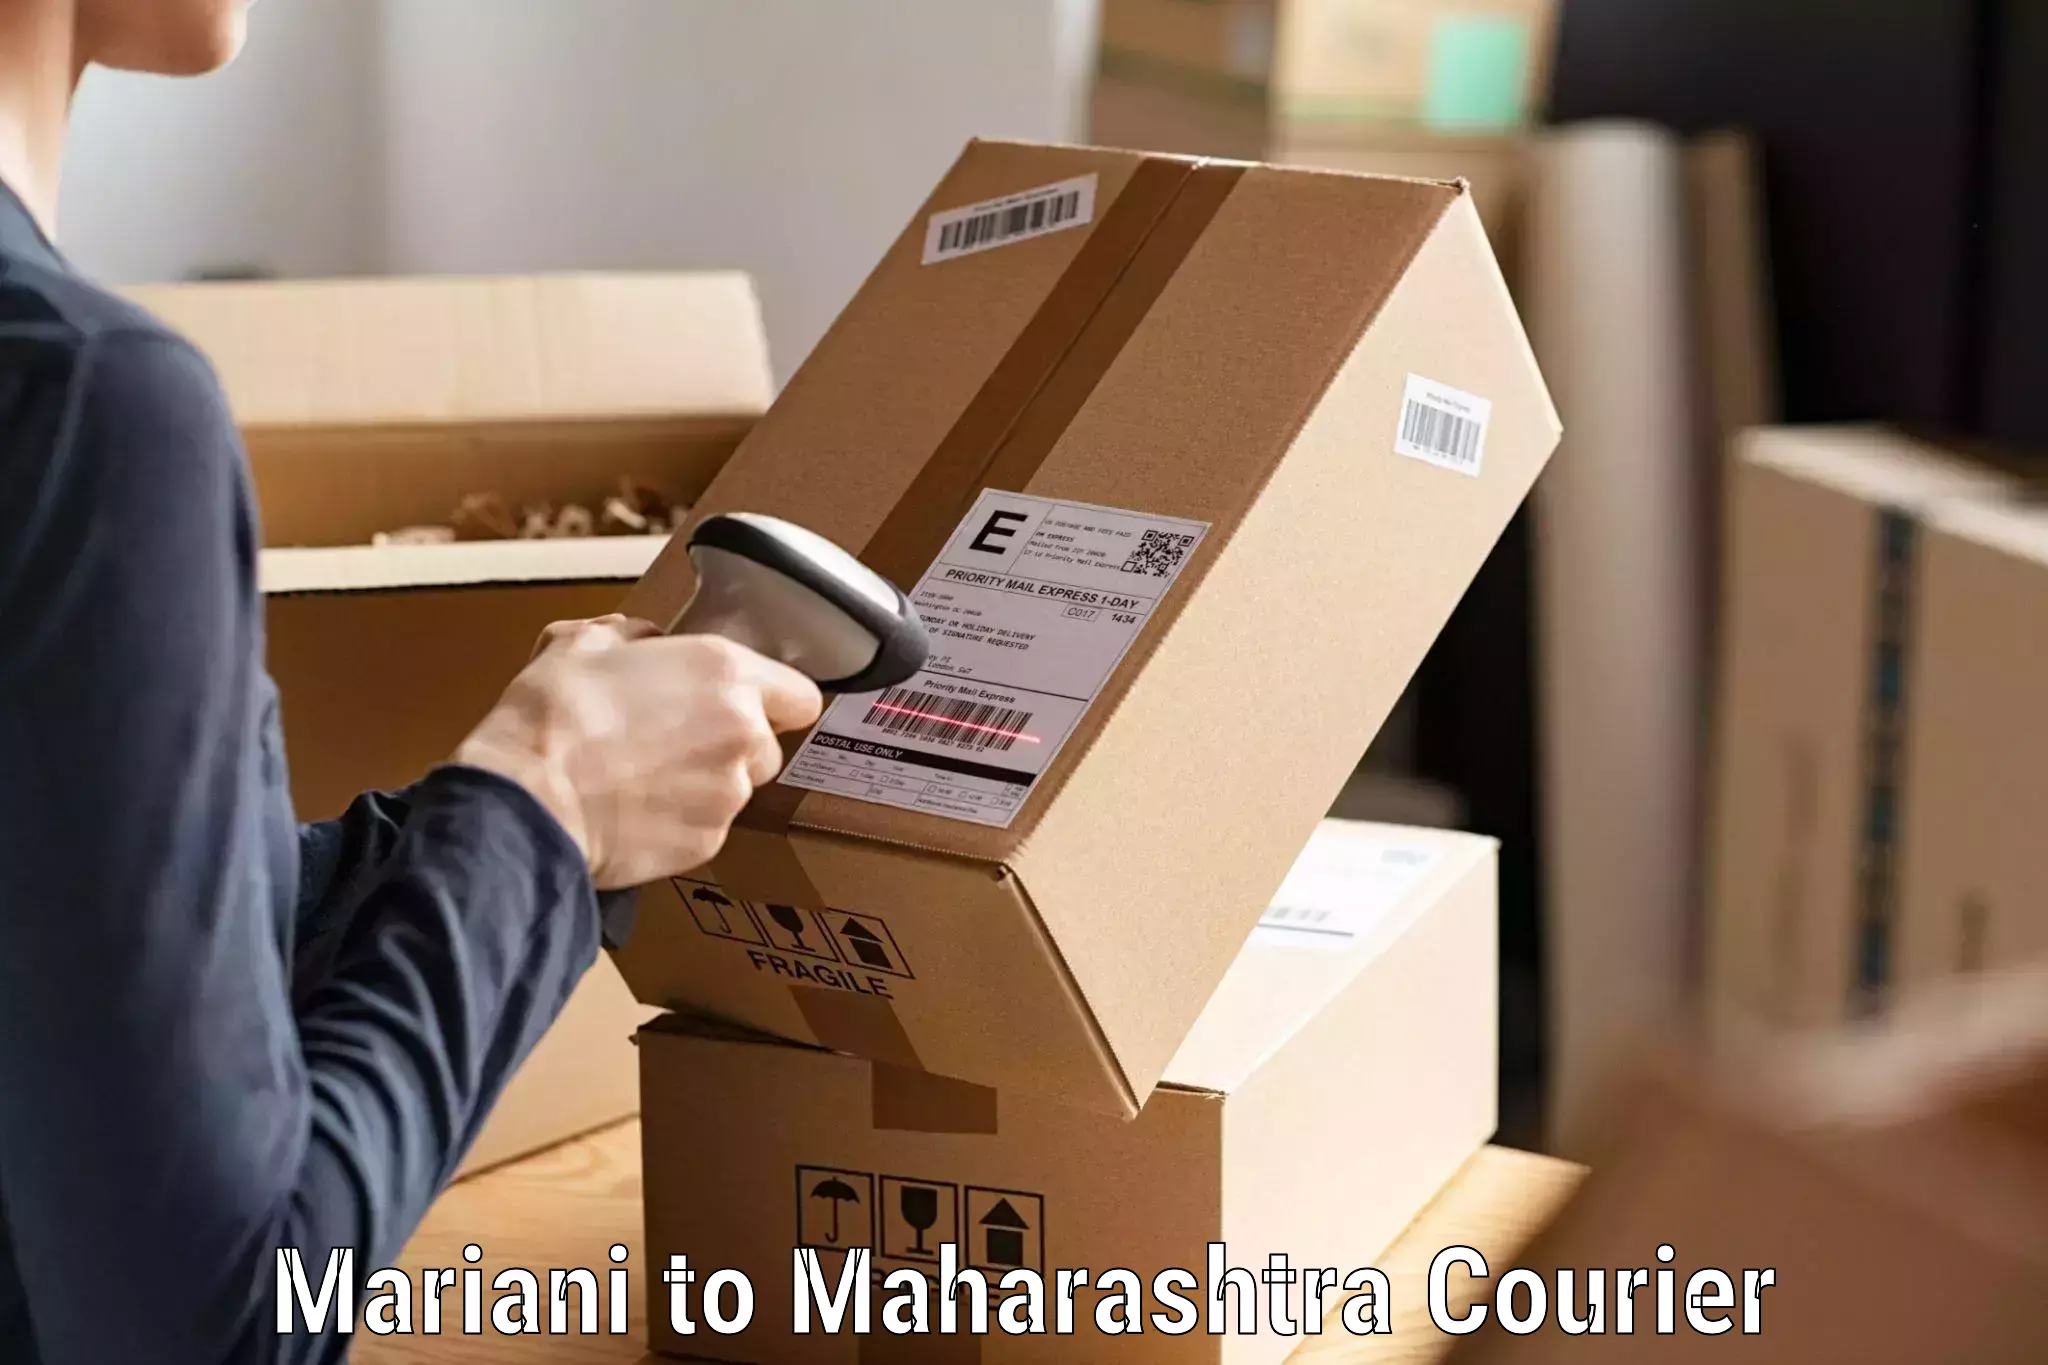 On-call courier service Mariani to Mumbai Port